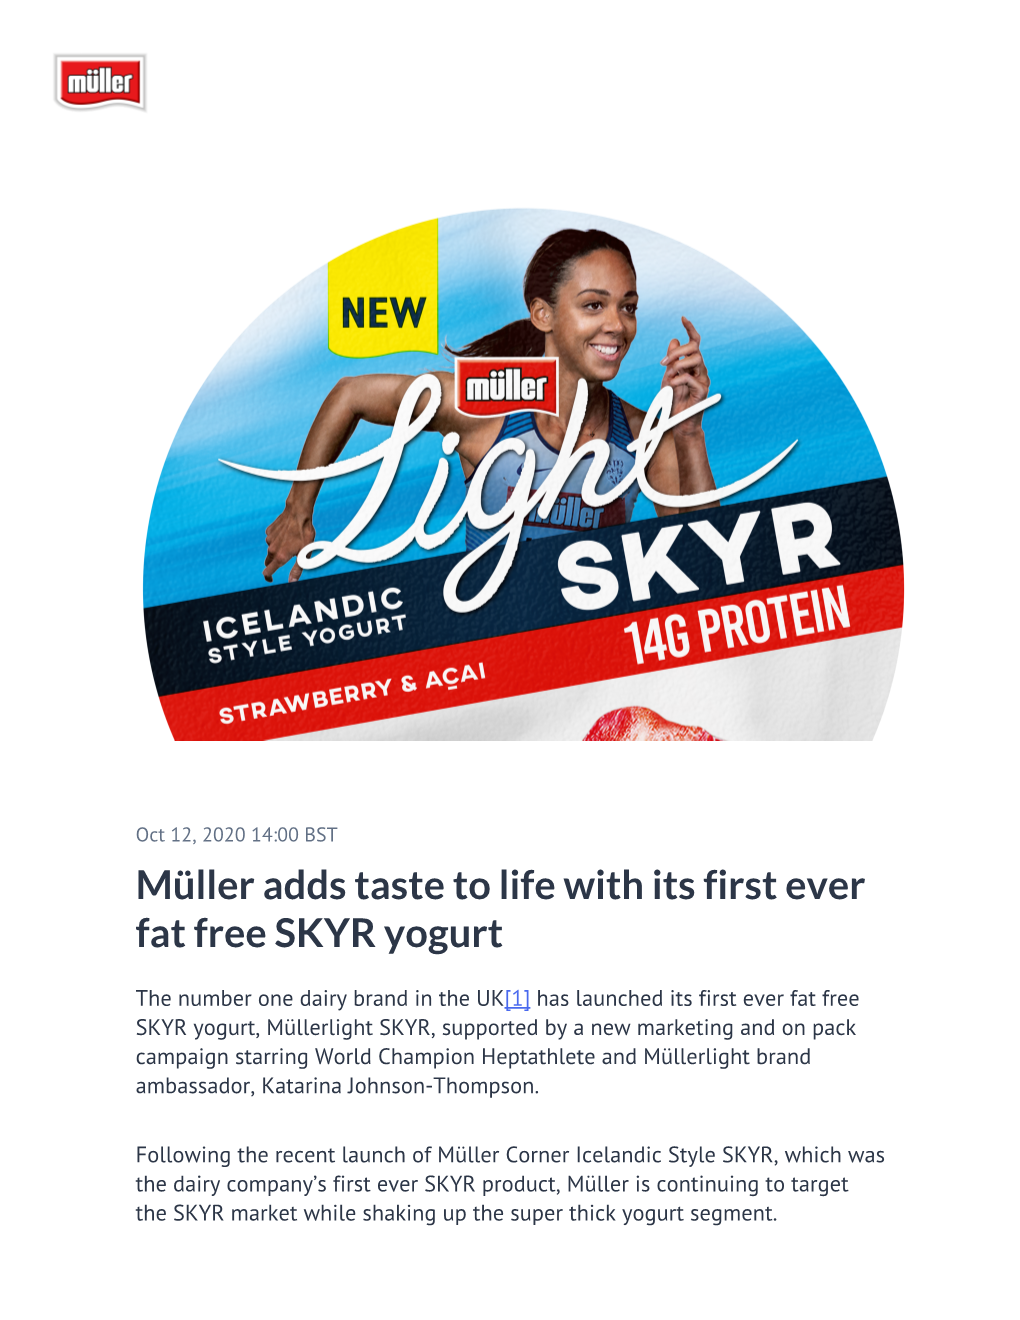 Müller Adds Taste to Life with Its First Ever Fat Free SKYR Yogurt